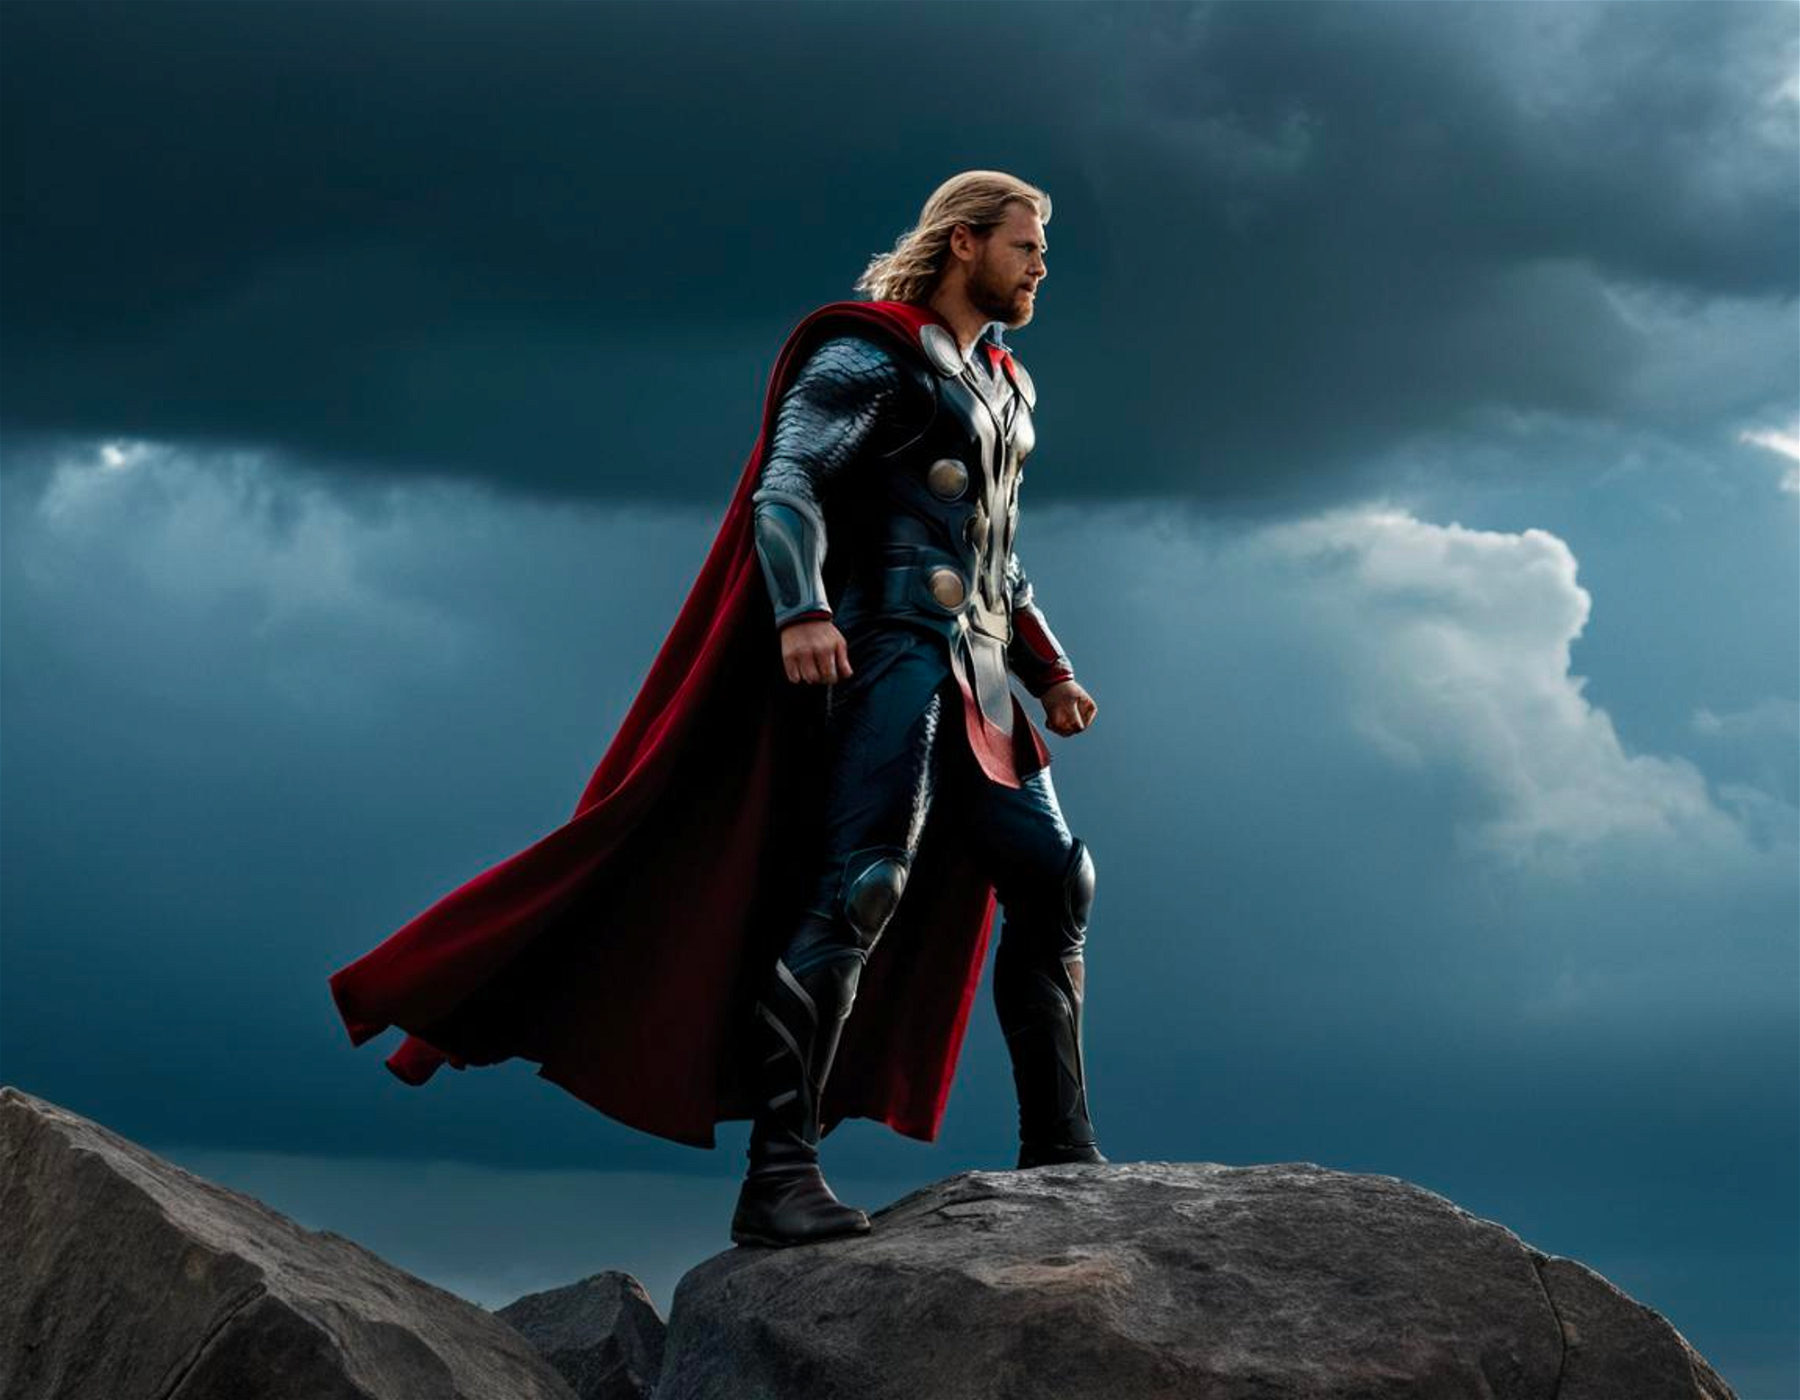 Thor standing on a rock, stormy sky, Marvel MCU